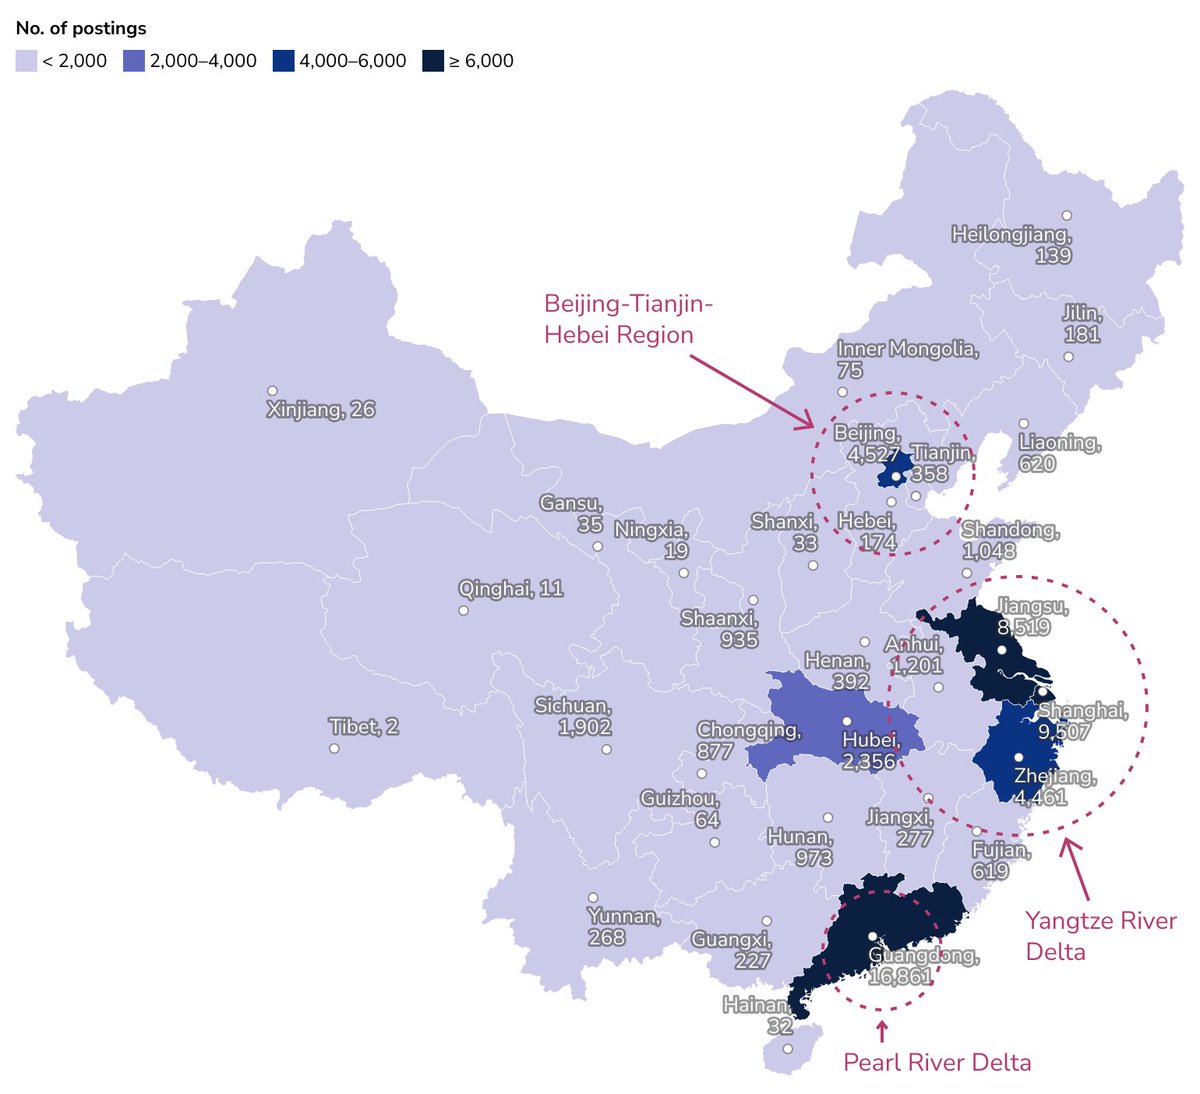 78% of China’s AI job postings are geographically concentrated in 3 economically and technologically developed hubs. Read the report 👉 bit.ly/4cCidgL